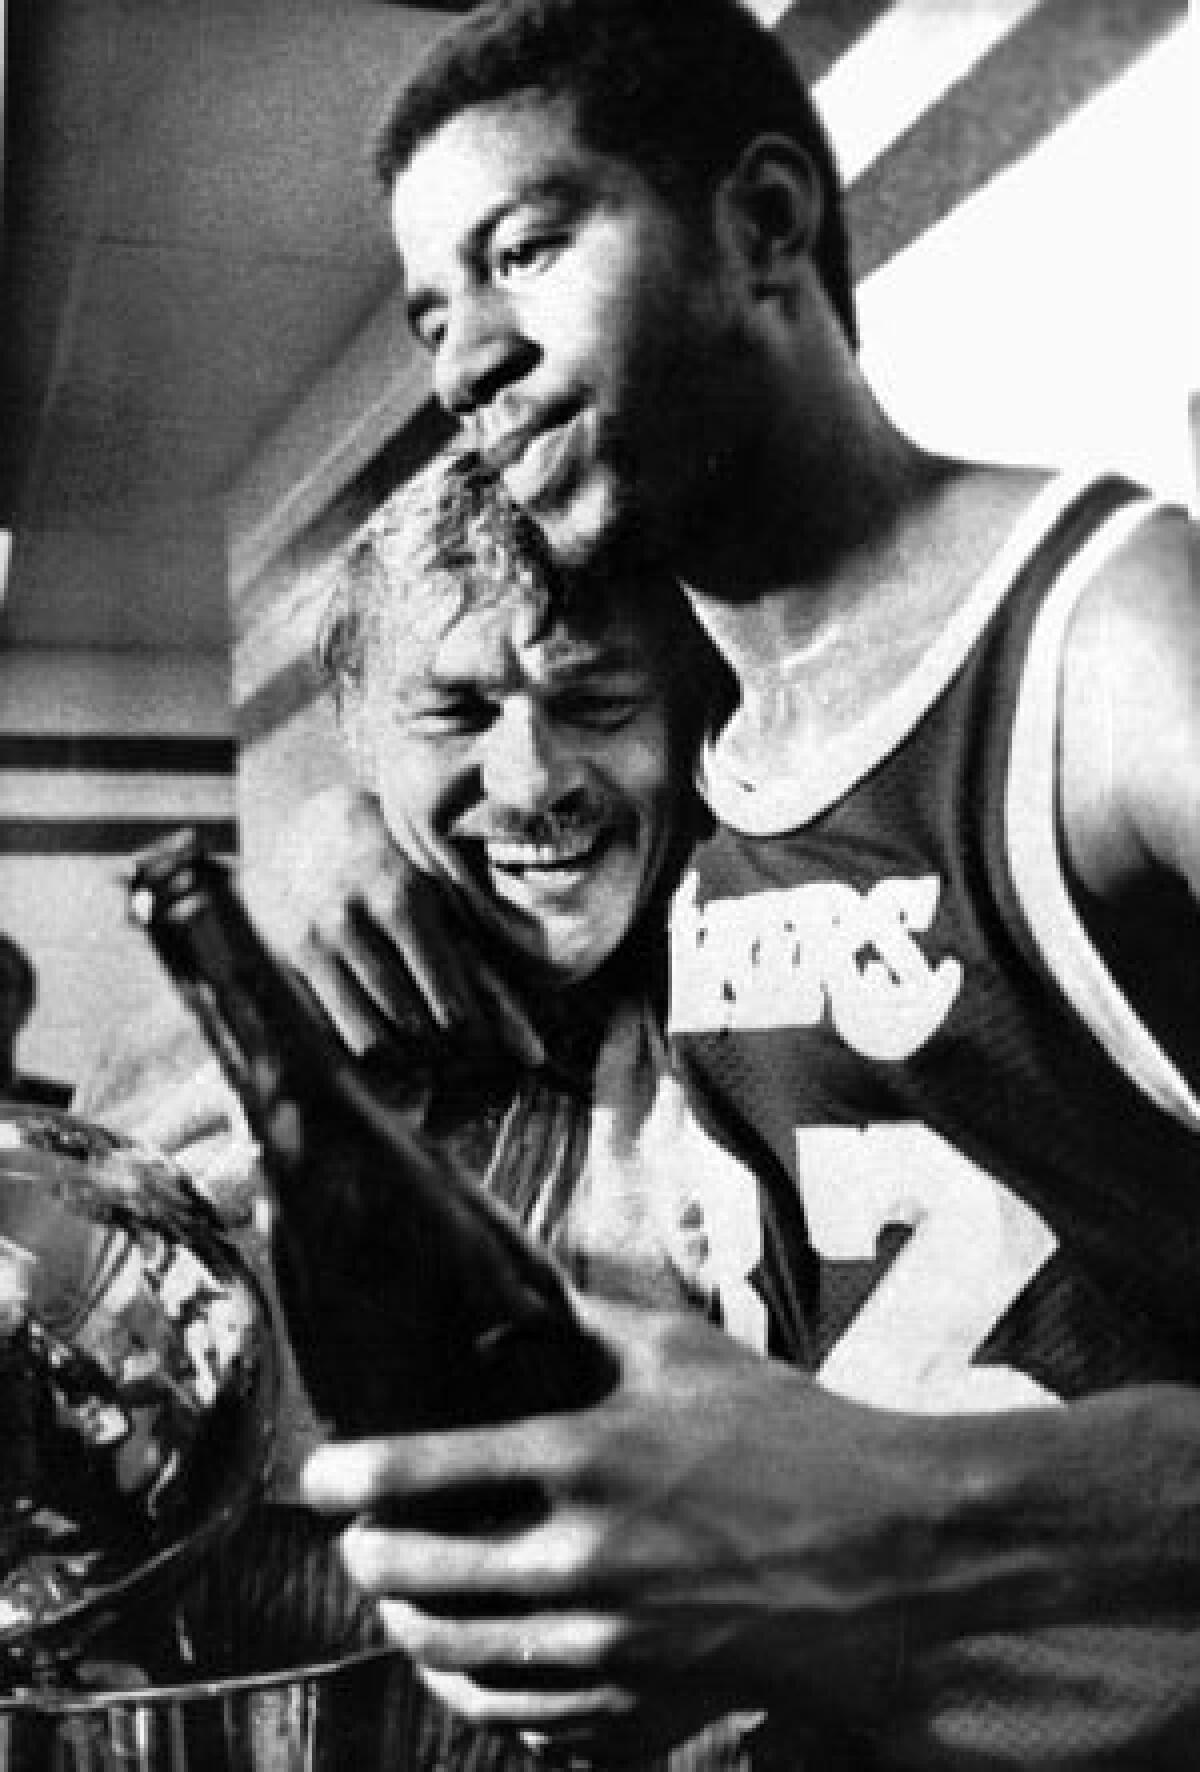 Magic Johnson and Jerry Buss celebrate the Lakers' title in 1980. It was their first NBA title as team owner and player.